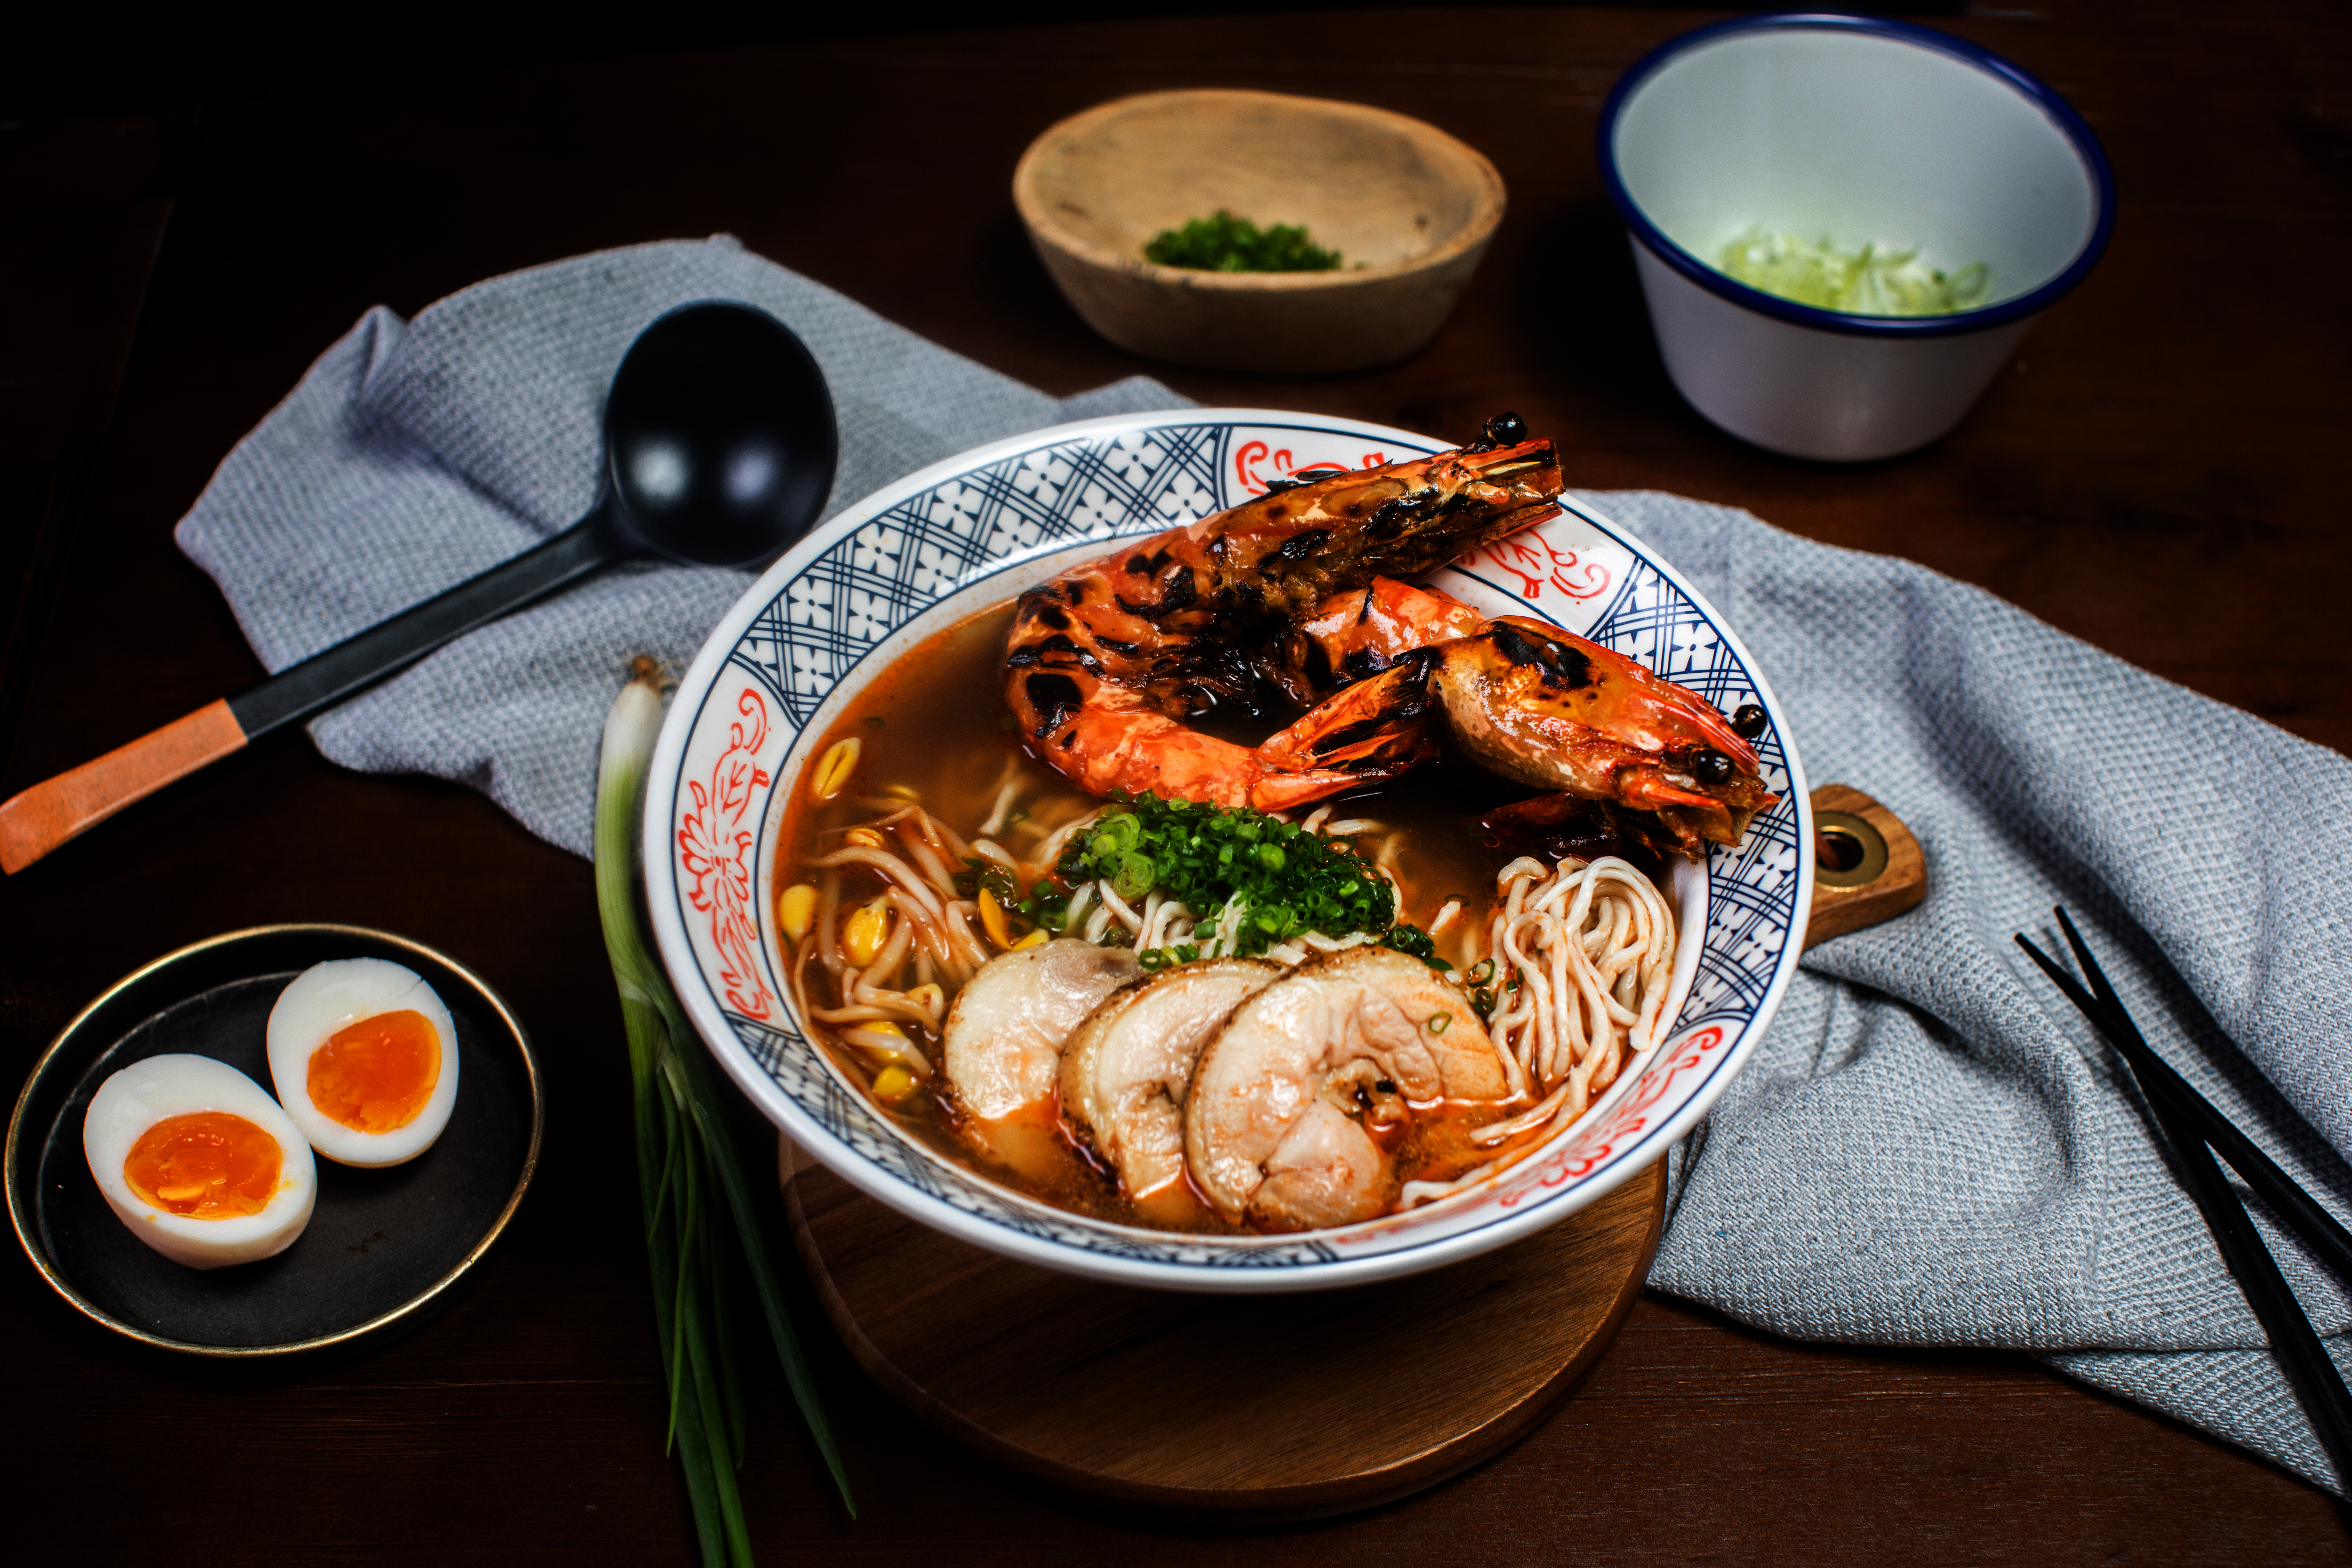 MOD-SIN NOODLE BAR, EBI BAR, OPENS IN CUPPAGE PLAZA